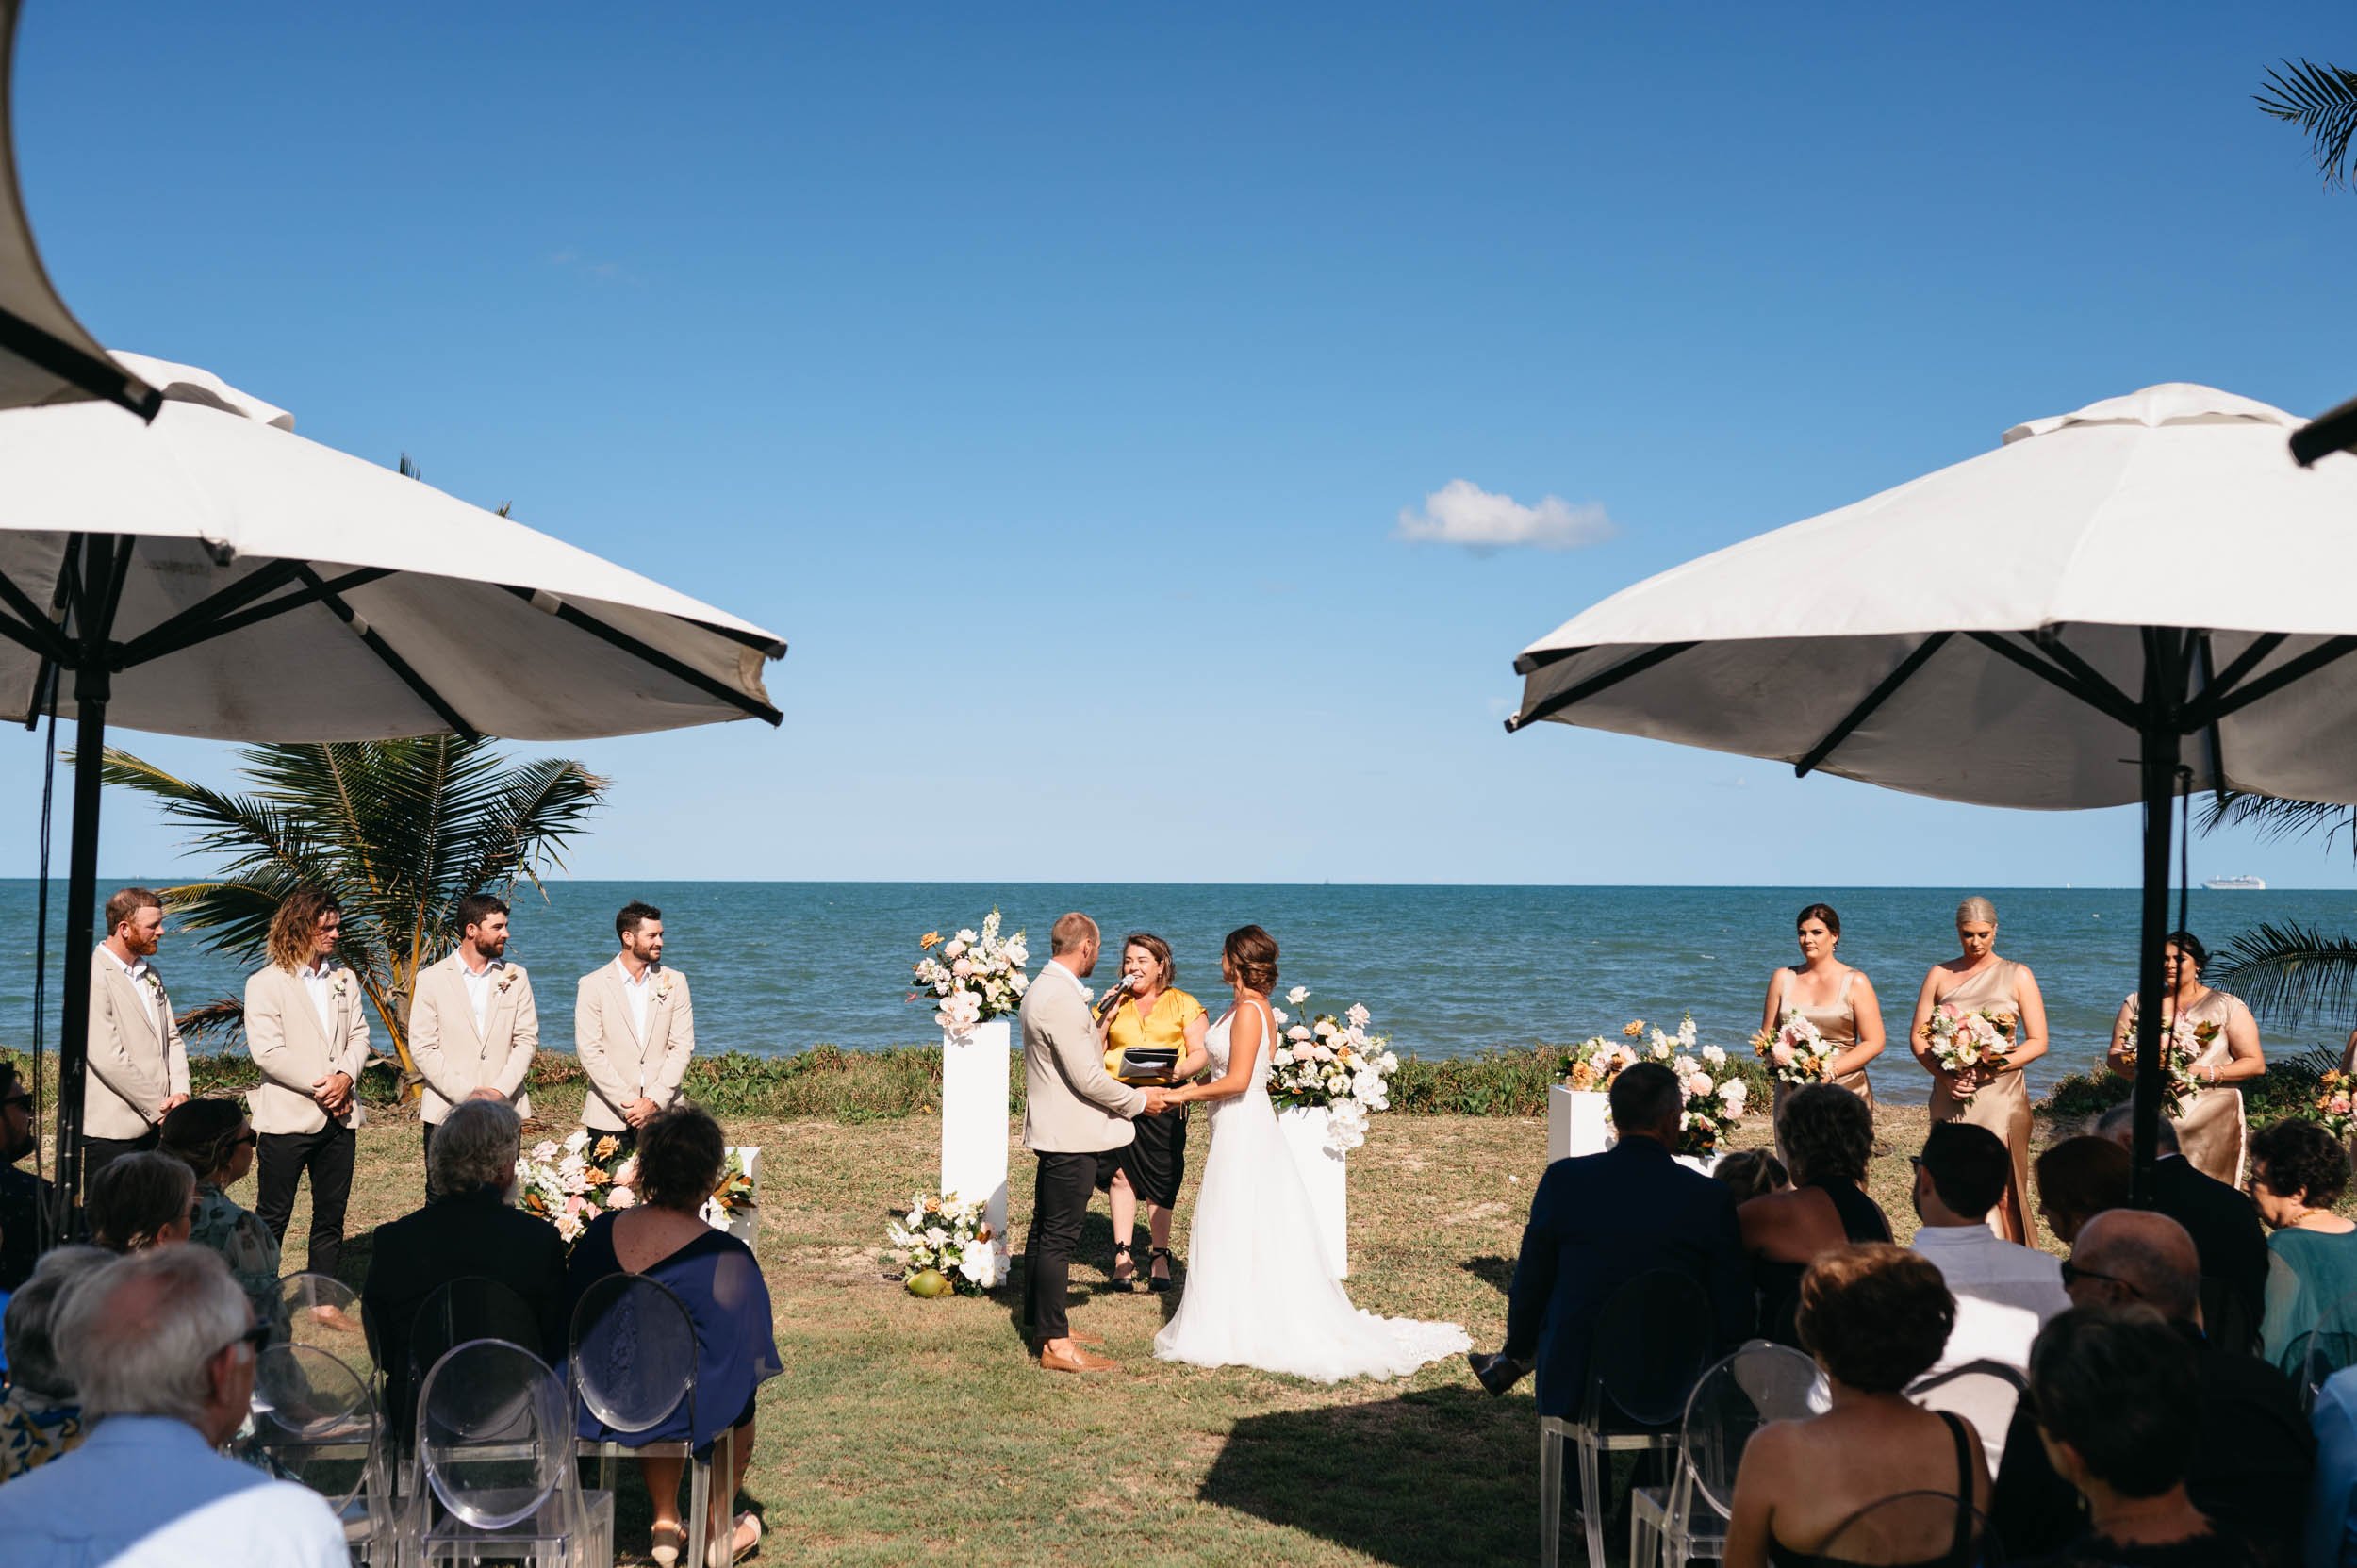 The Raw Photographer - Cairns Wedding Photographer - Port Douglas ceremony venues and locations-4.jpg